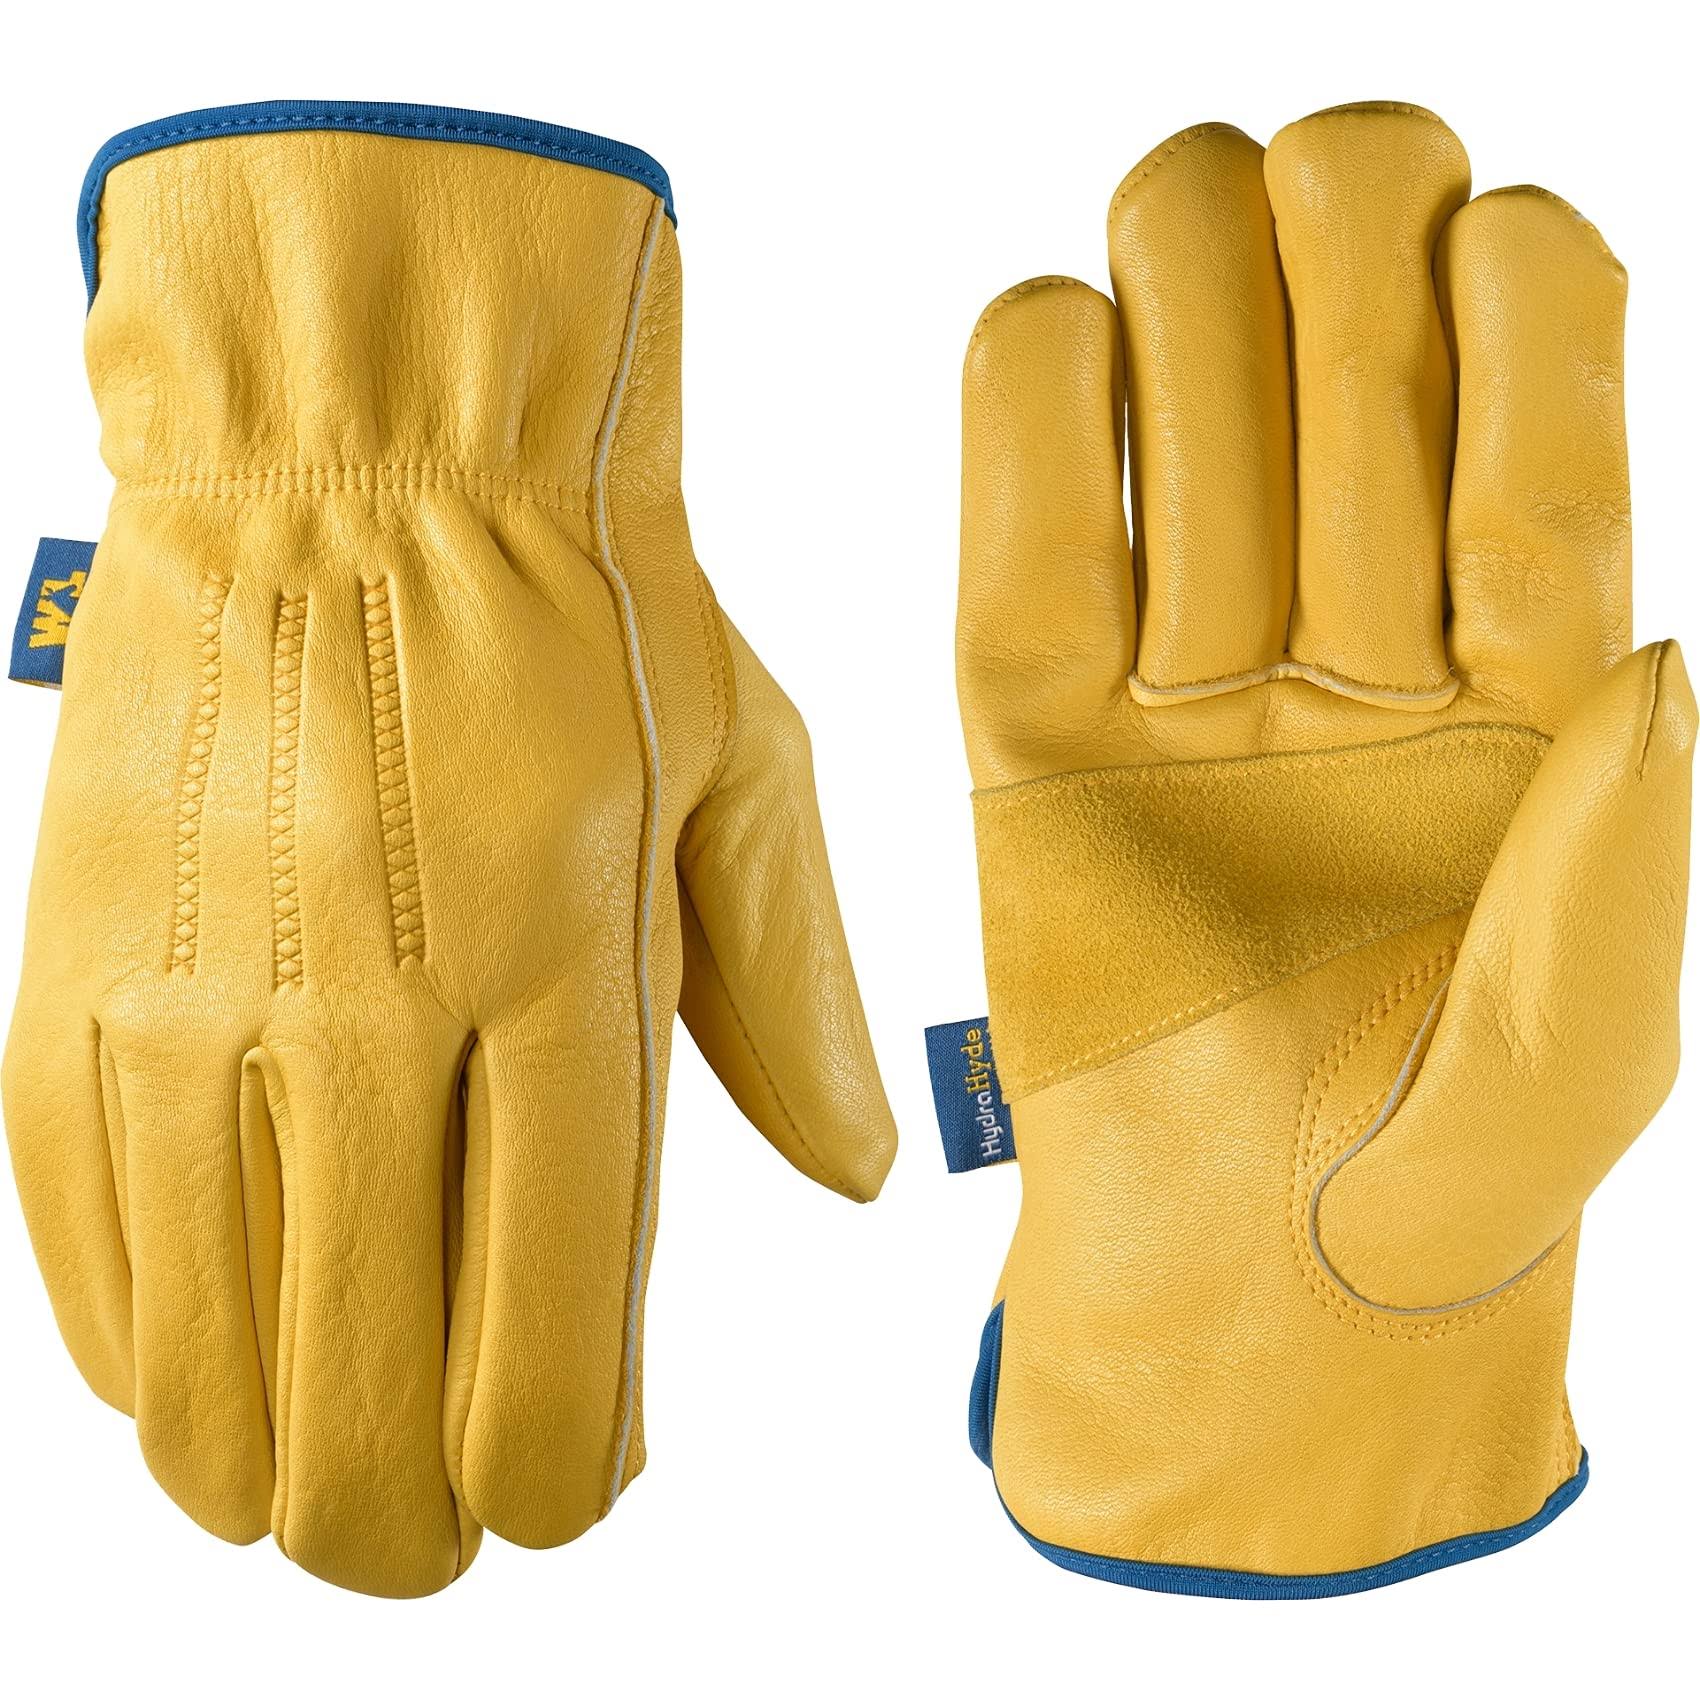 Wells Lamont Mens Slip-On HydraHyde Full Leather Work Gloves | Water-Resistant | Large (1168L)